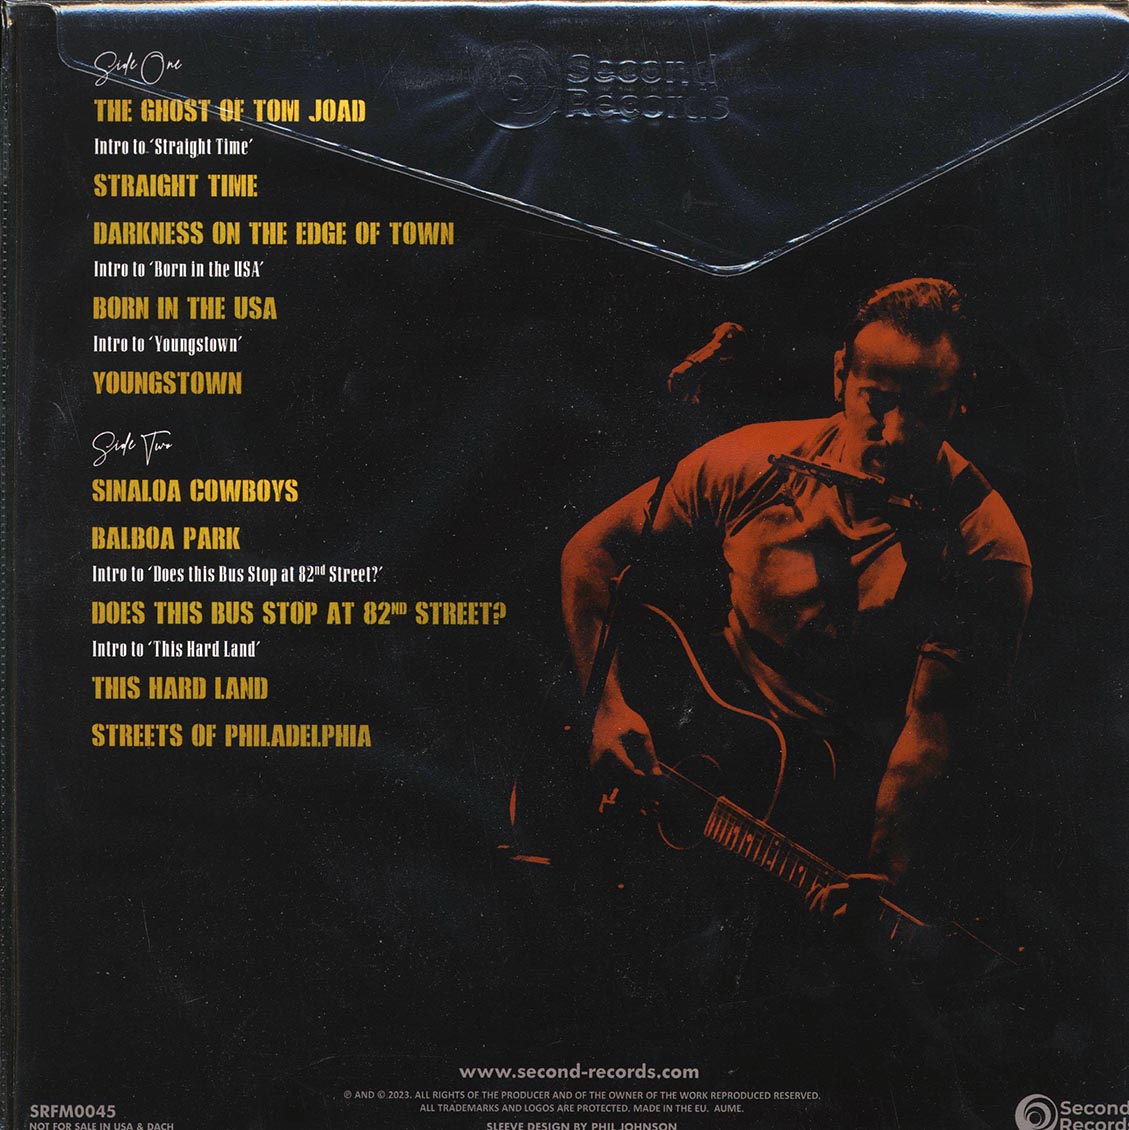 Bruce Springsteen - One Night Stand: Columbia Records Radio Hour, The Tower Theater Philadelphia, December 14th 1995 (180g) (clear vinyl) - Vinyl LP, LP